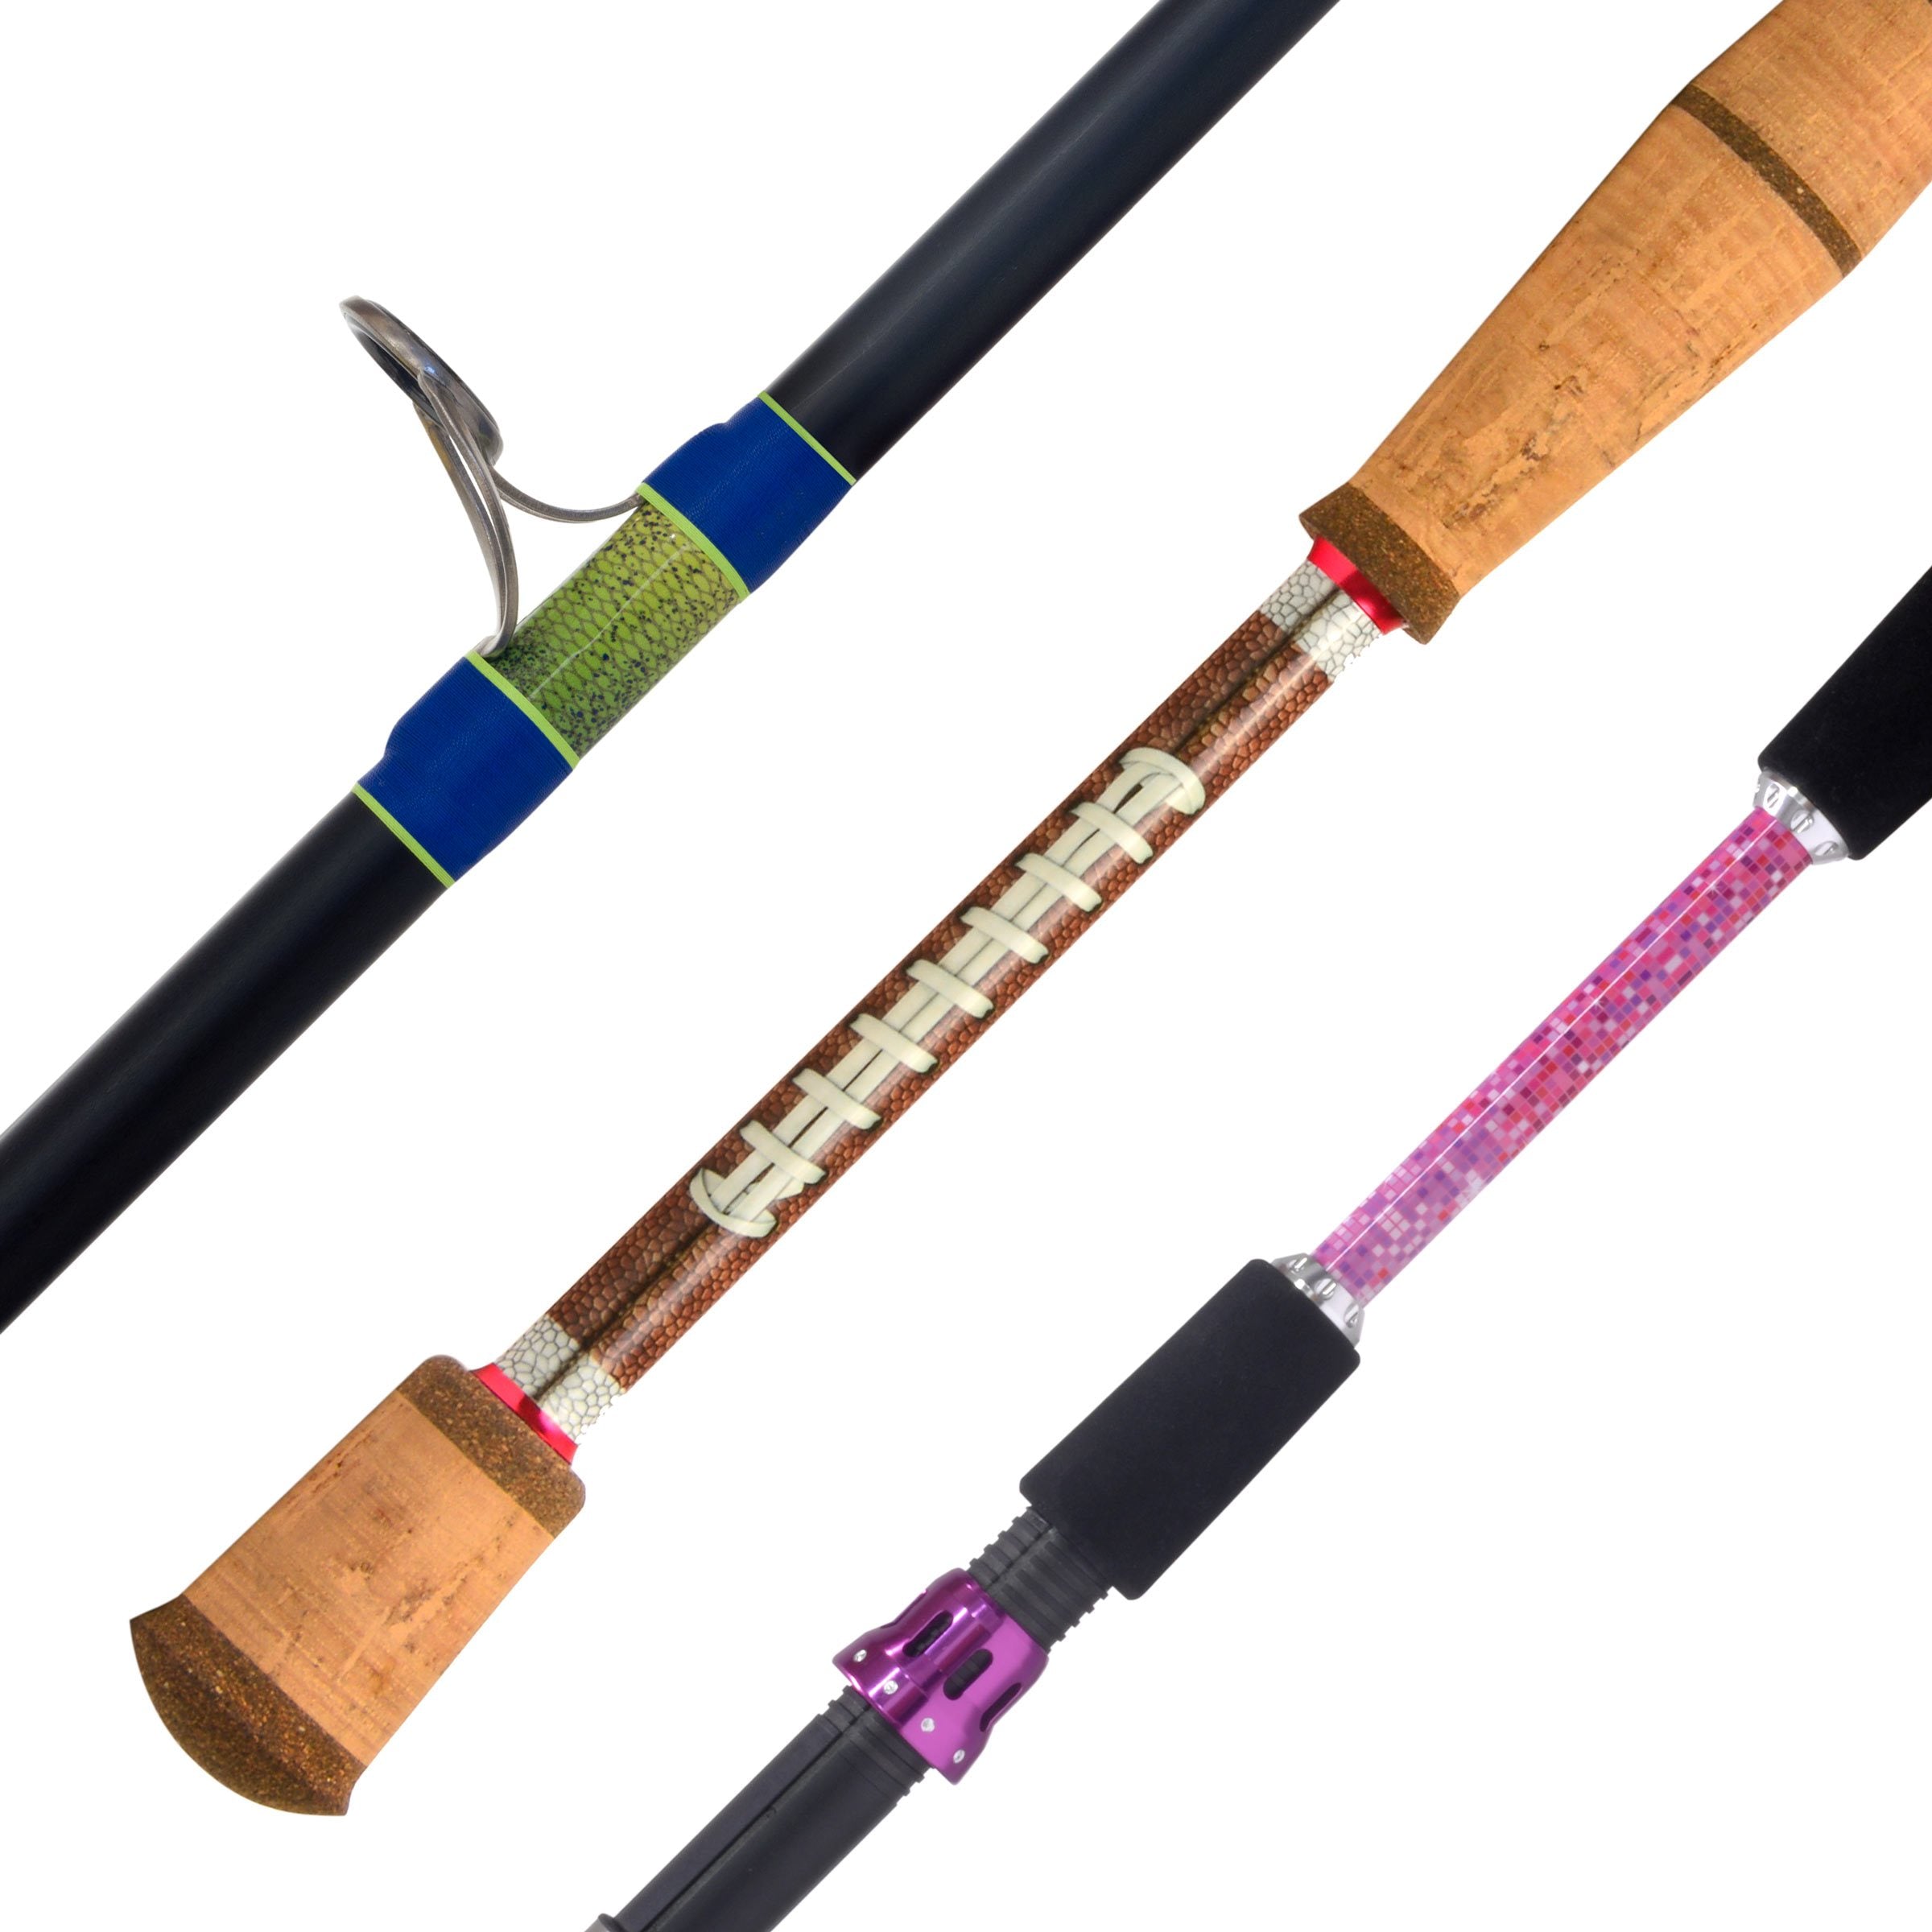 Wrapping Fishing Rods & Rod Wrapping Patterns 